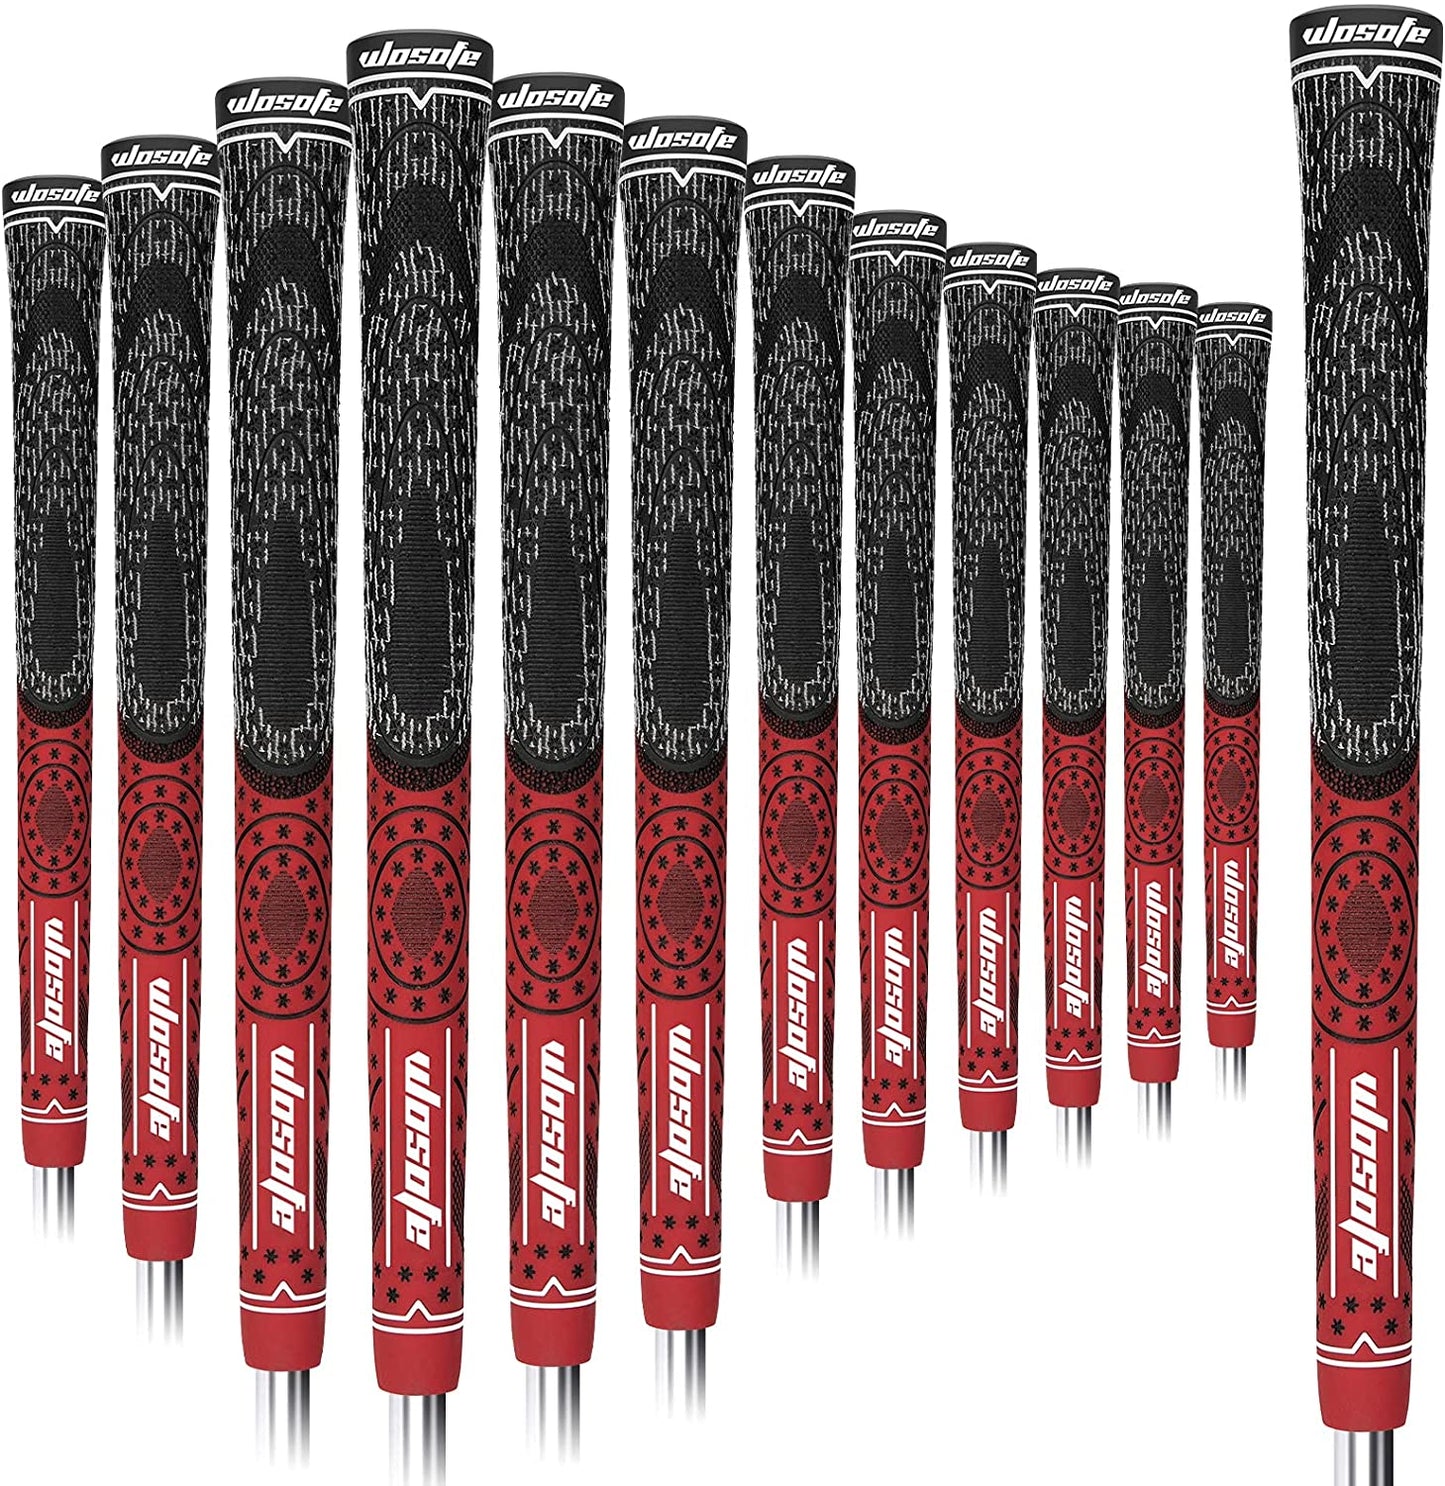 Golf Grips for Club Rubber Standard Midsize 13 Pack Anti-Slip Absorb Sweat Compound Black Red